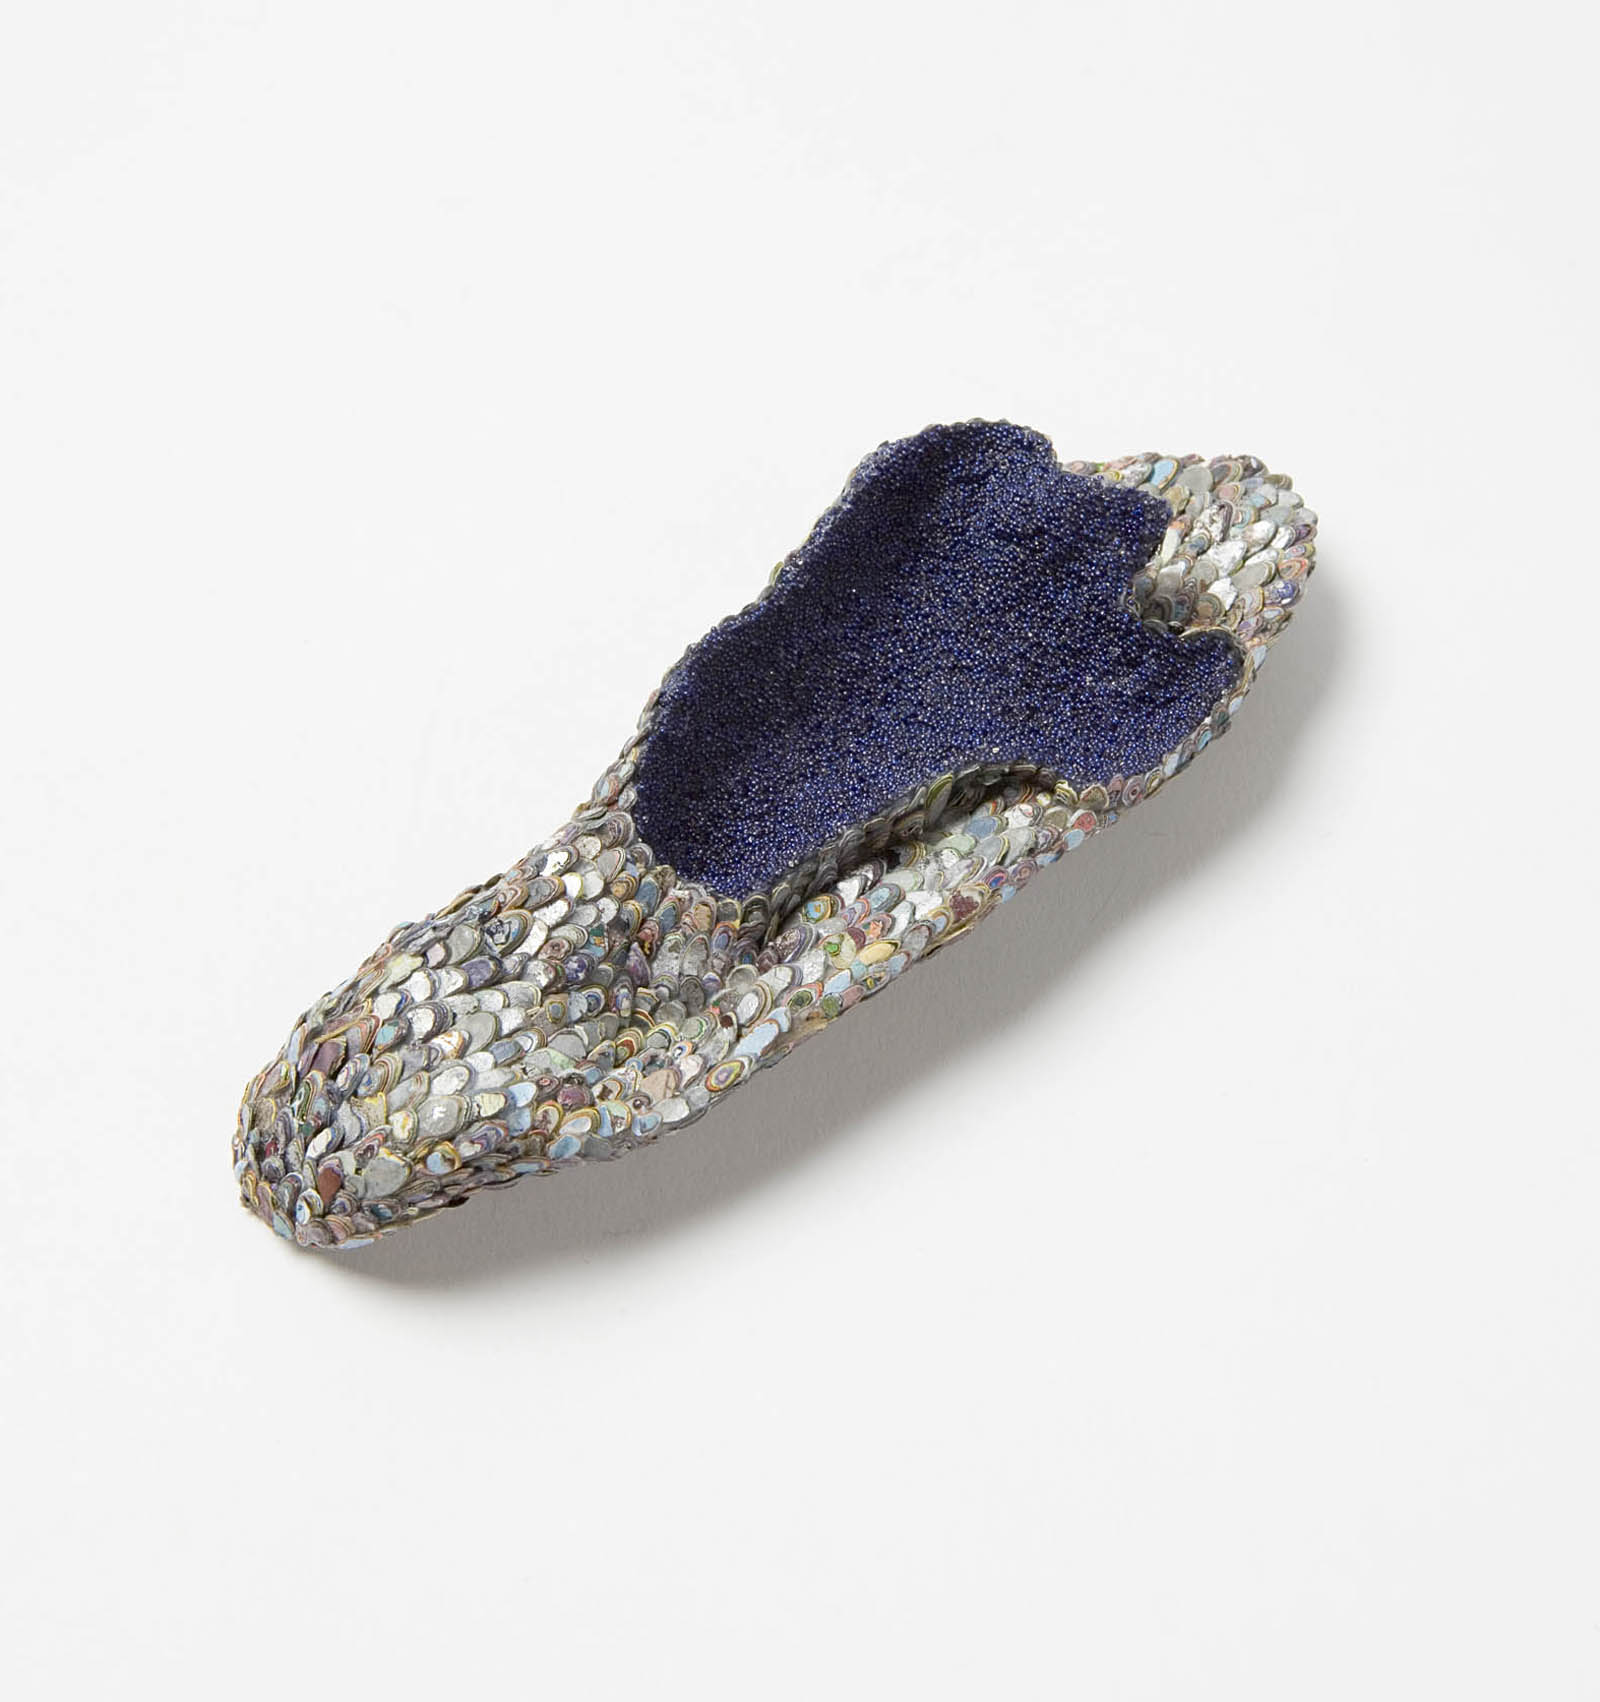 "Where Blue Hides After Dark" I Brooch, 2014 I Graffiti, oyster shell, glass, silver, stainless steel I Photo: Mirei Takeuchi